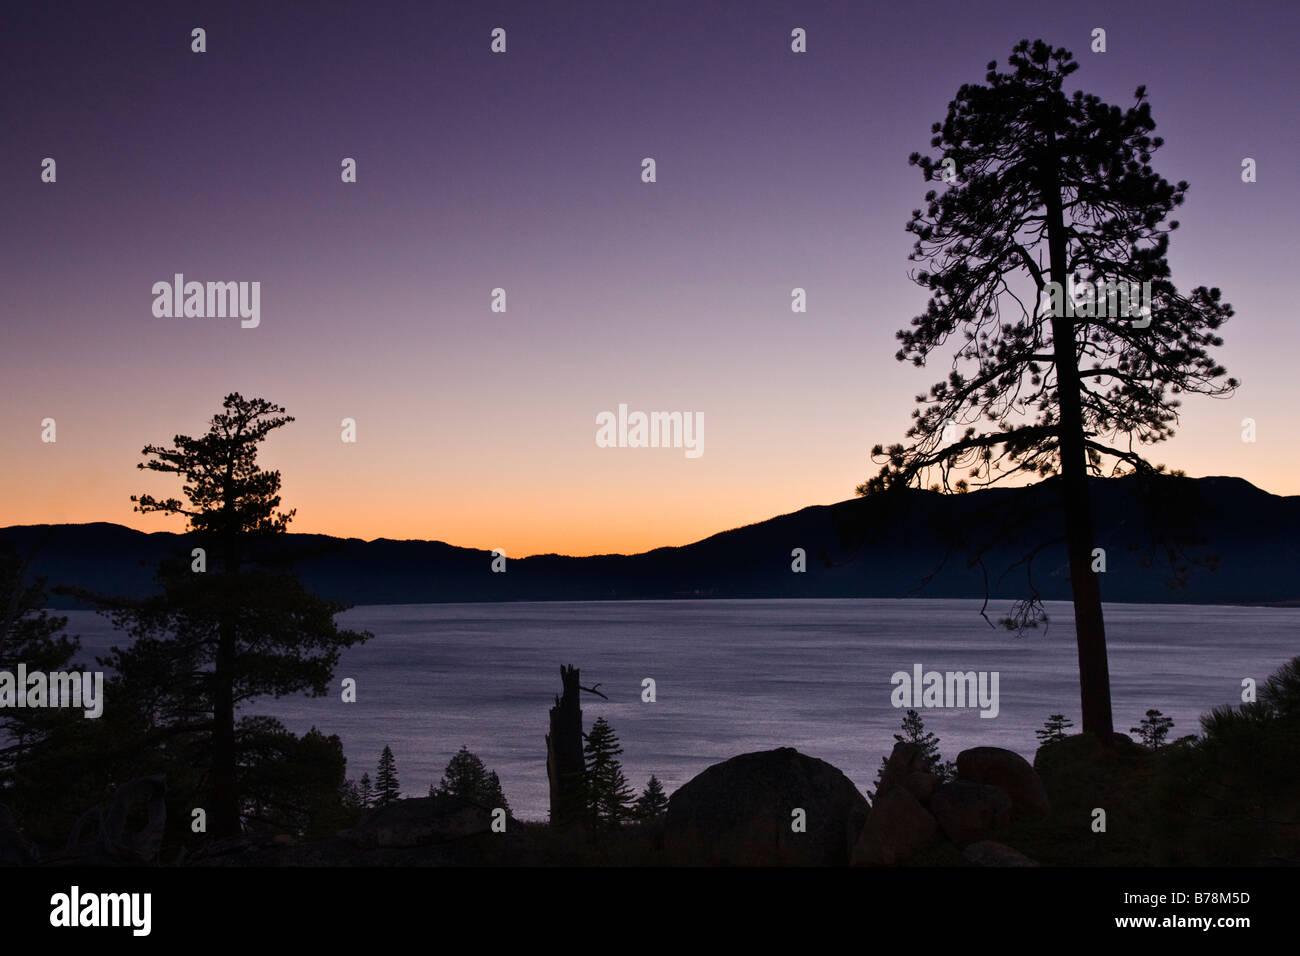 Sugar pines and reflections on Lake Tahoe in California at dawn Stock Photo